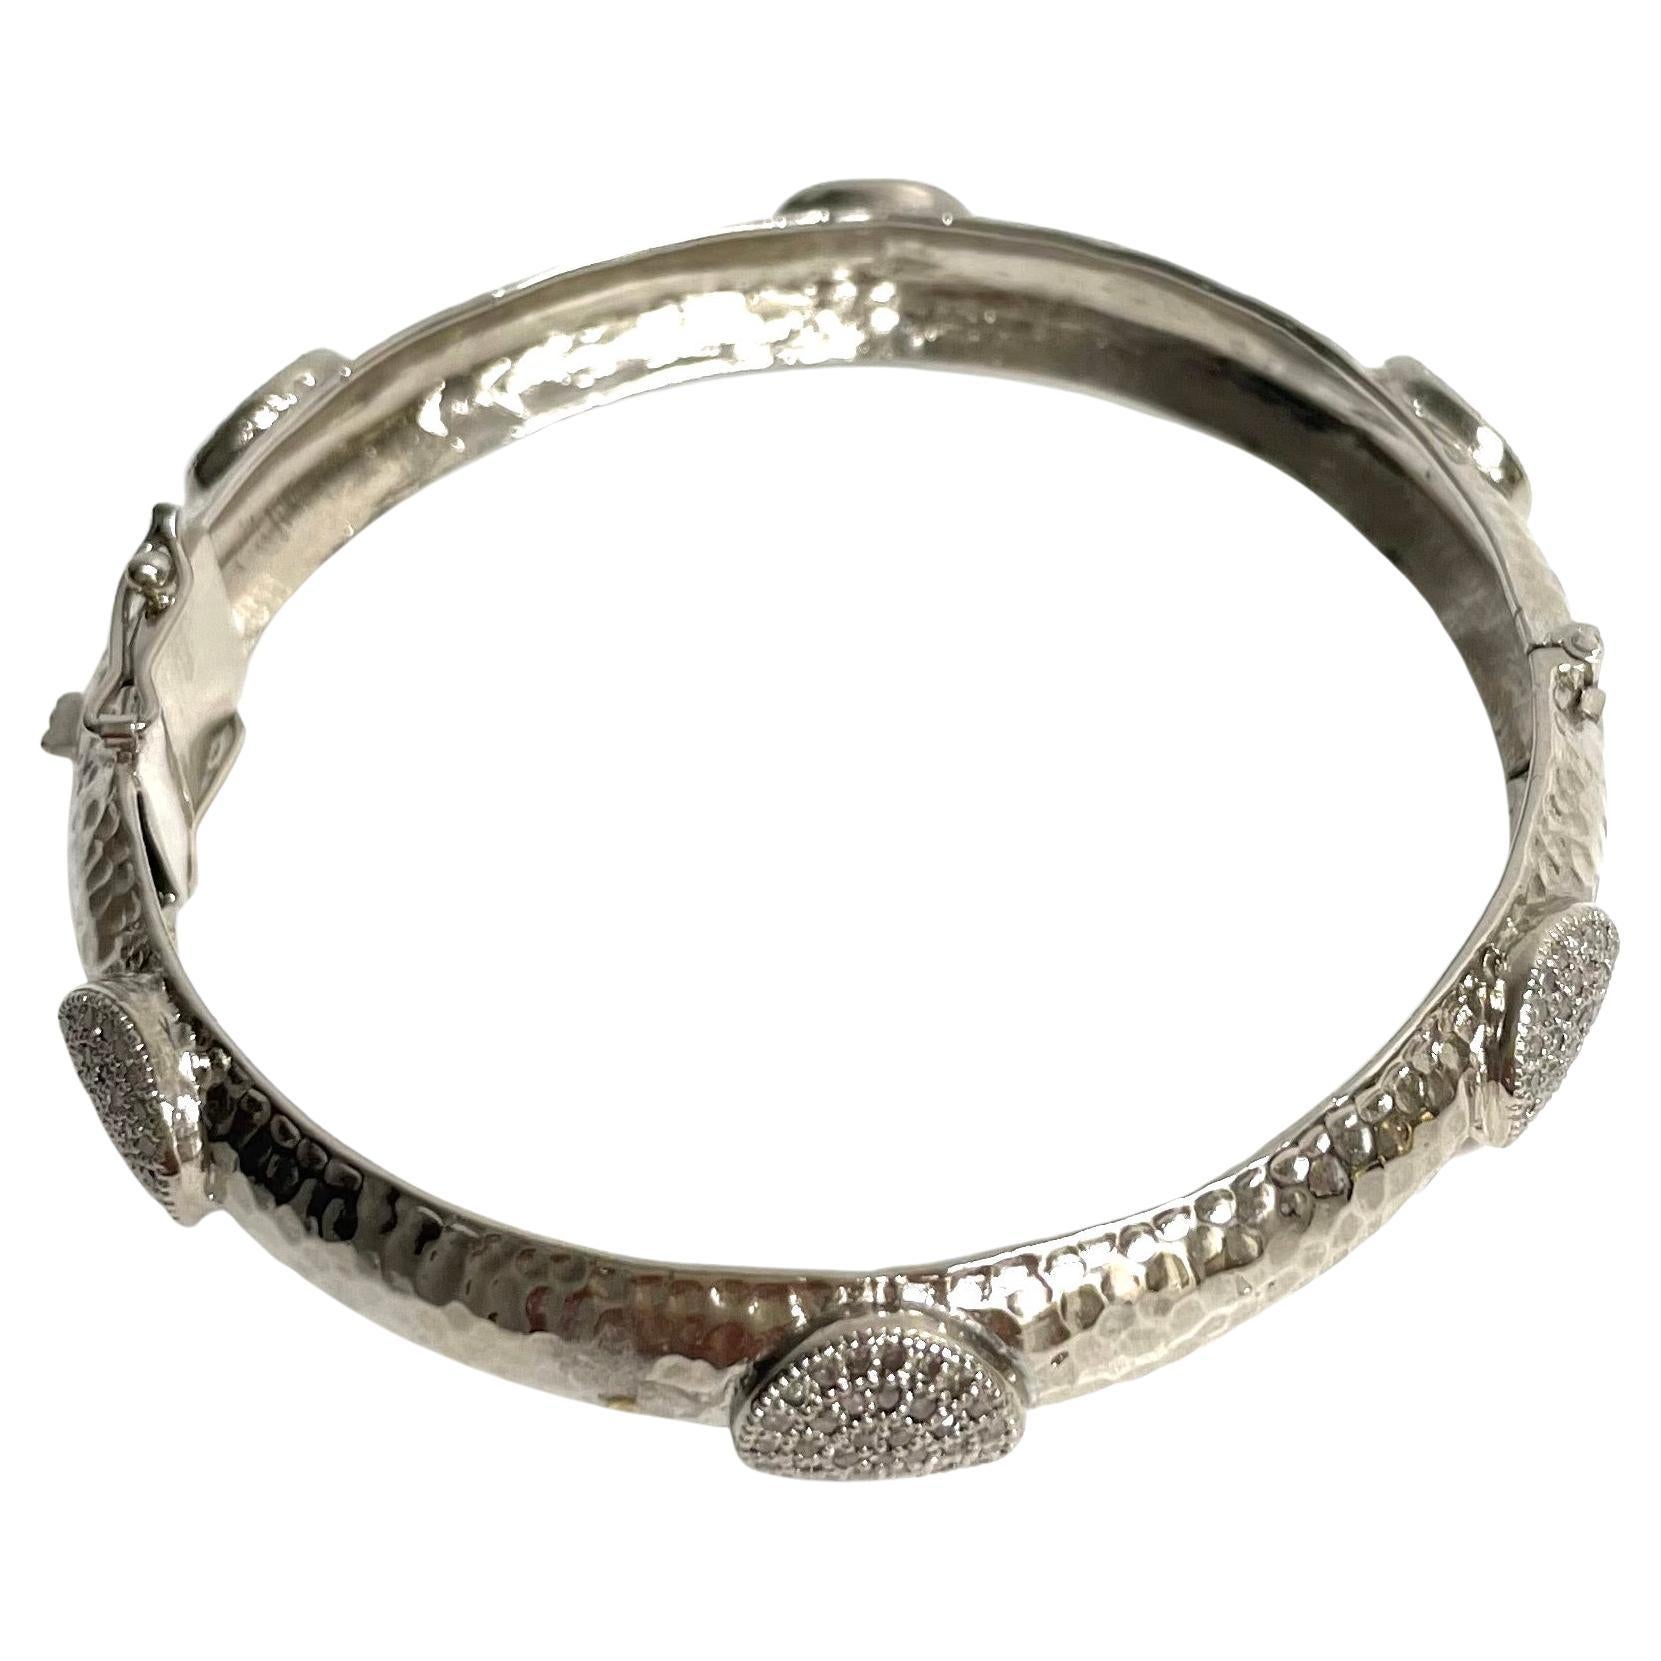  Hammered Rhodium-Plated Silver Bangle with Diamonds Paradizia Bracelet For Sale 5